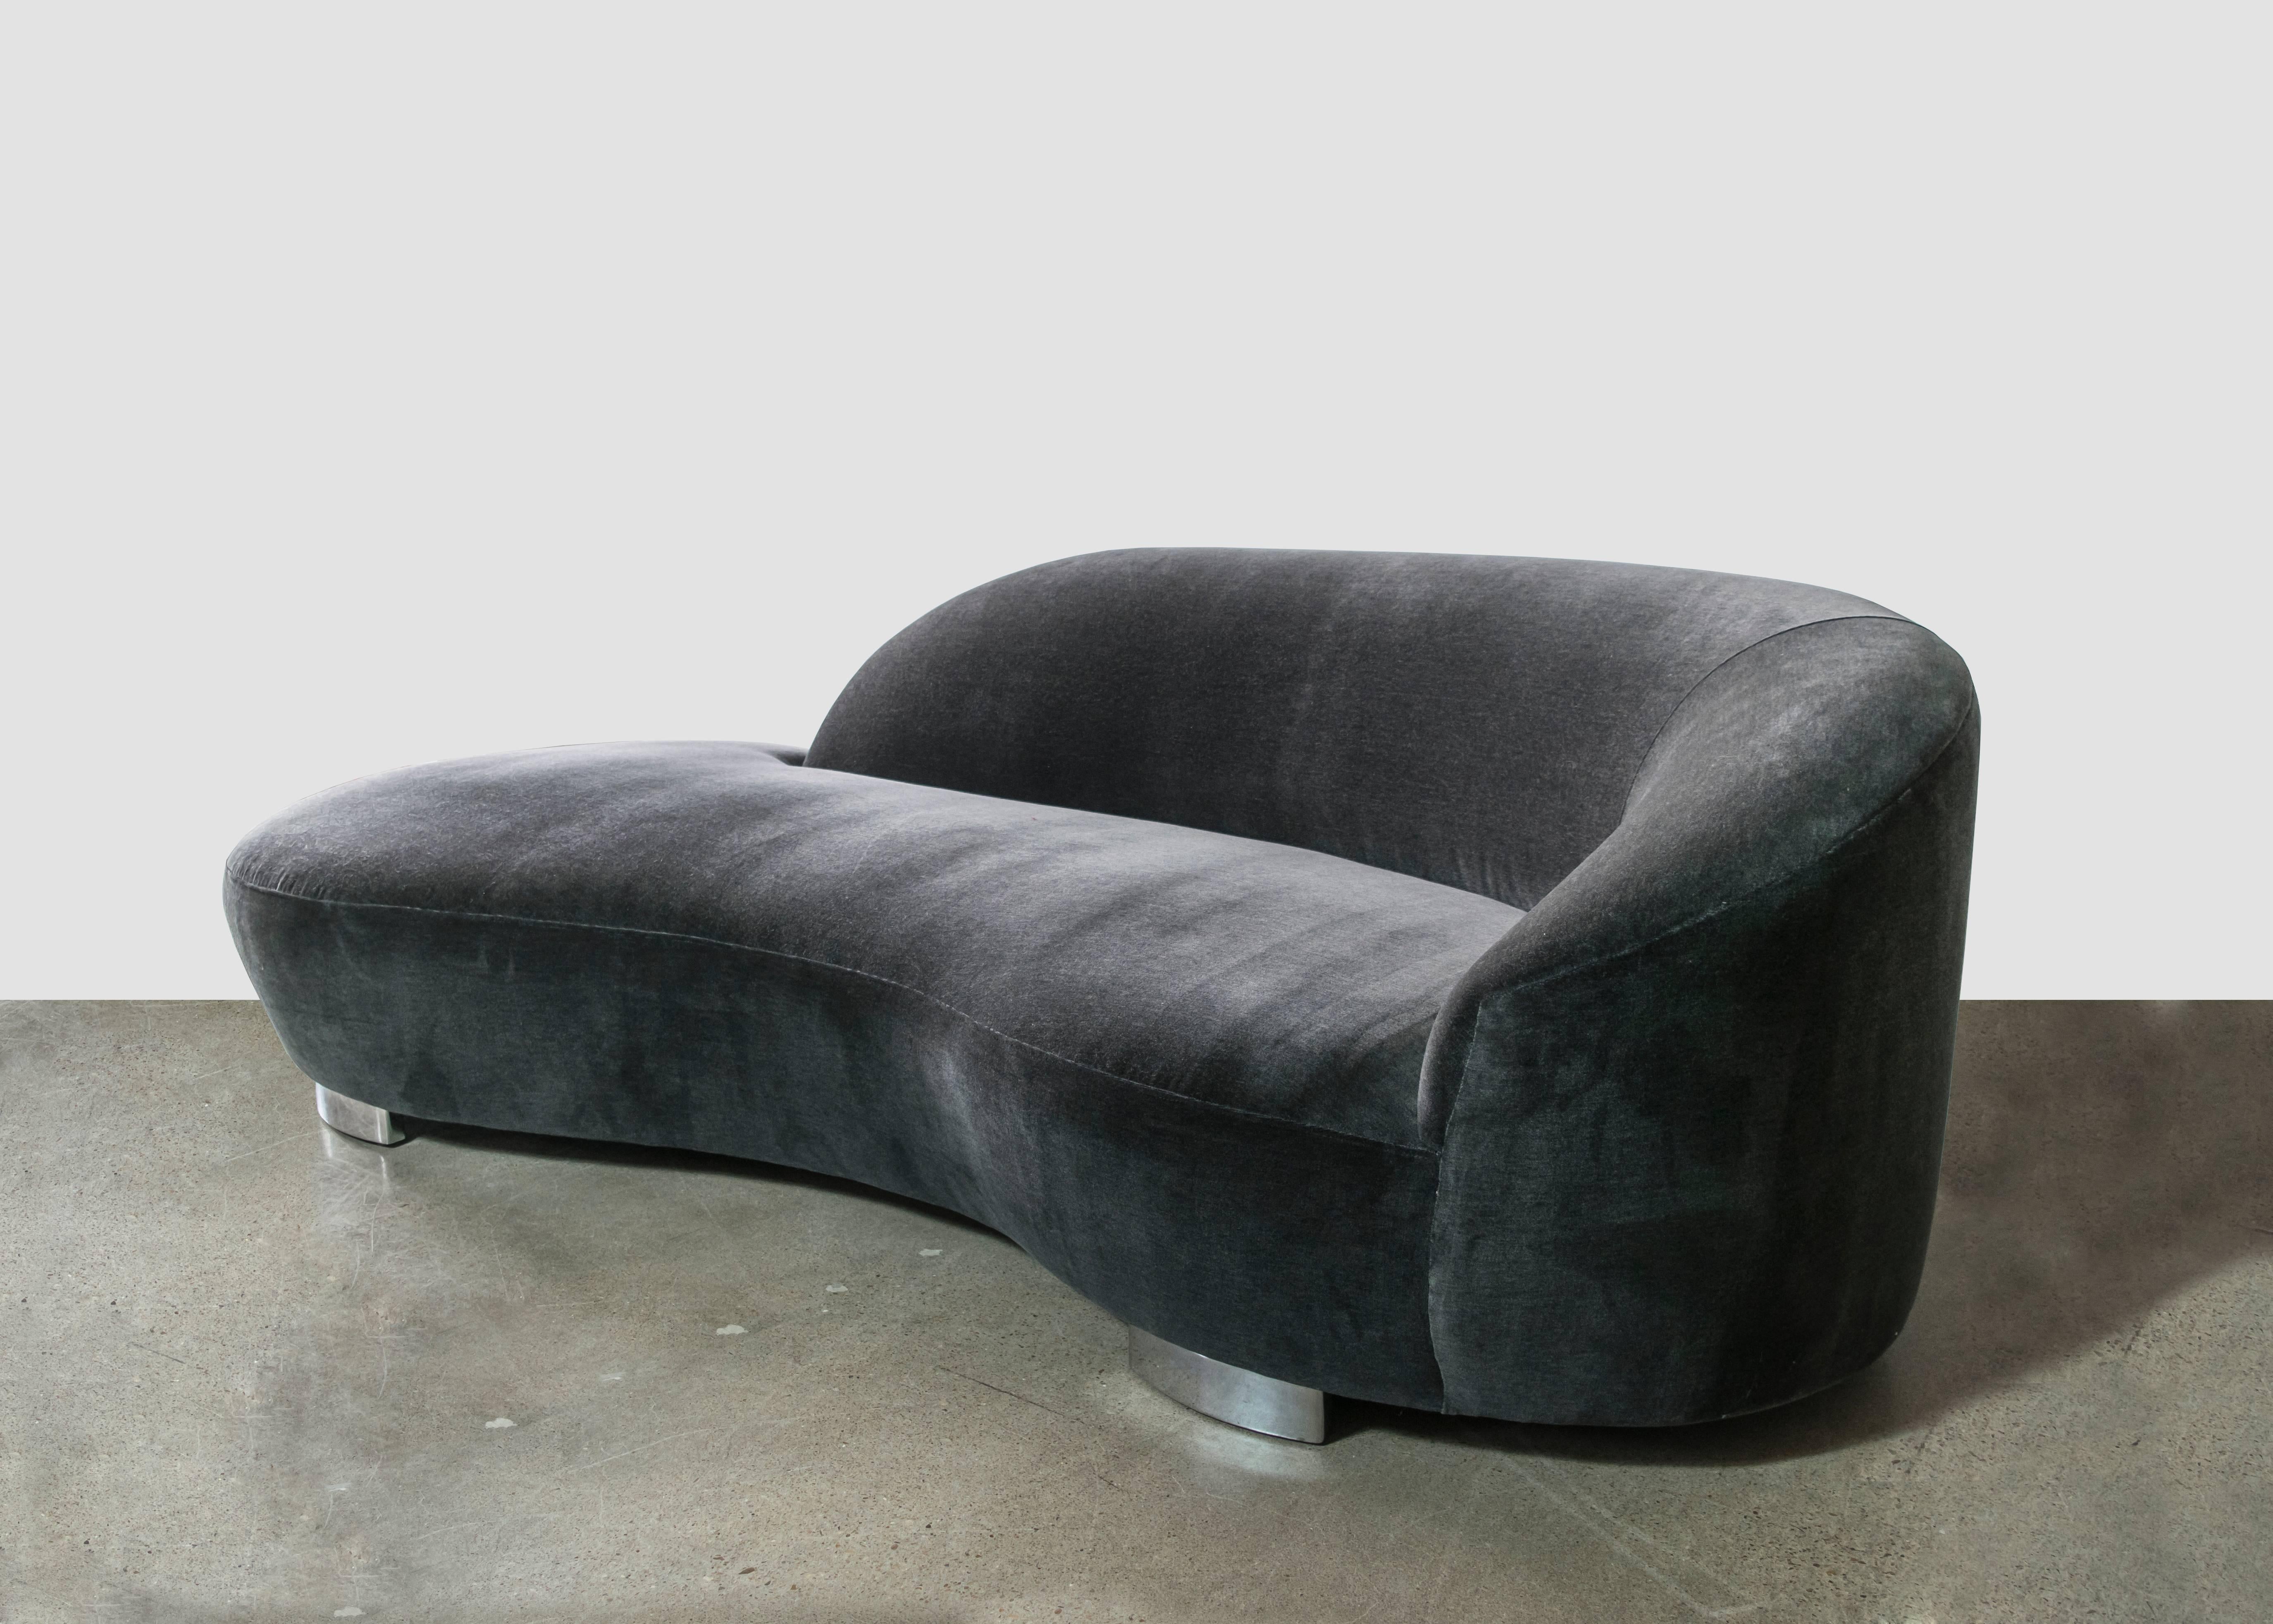 This exquisite cloud sofa designed in the style of Vladimir Kagan by Weiman in the 1990s has recently been upholstered in luxurious charcoal mohair velvet. The sofa sits upon chrome feet.